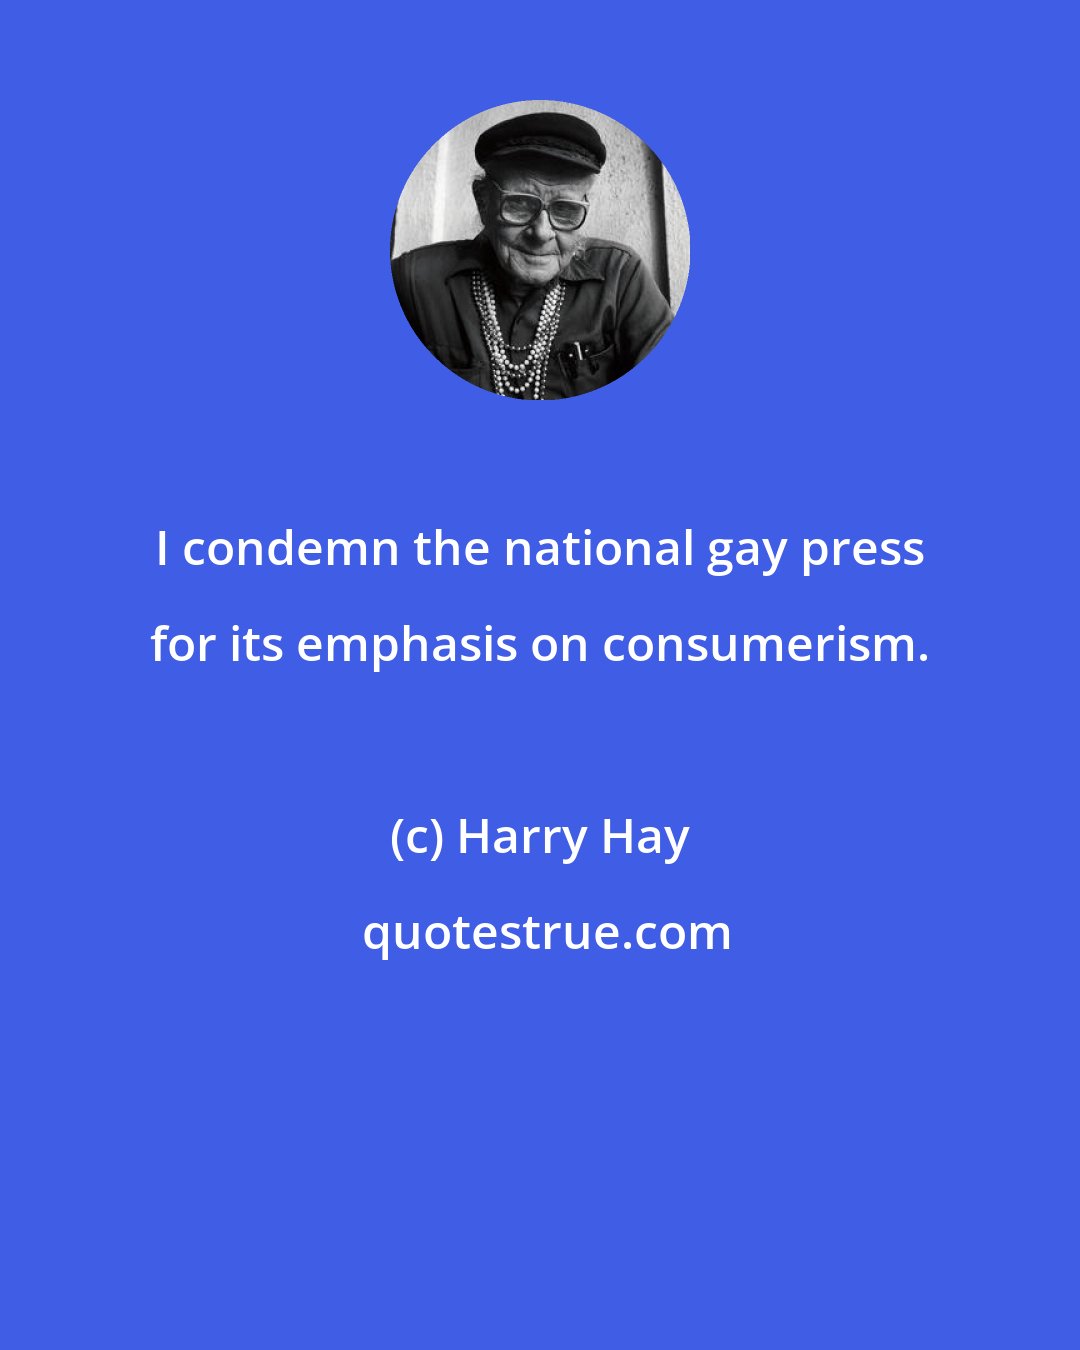 Harry Hay: I condemn the national gay press for its emphasis on consumerism.